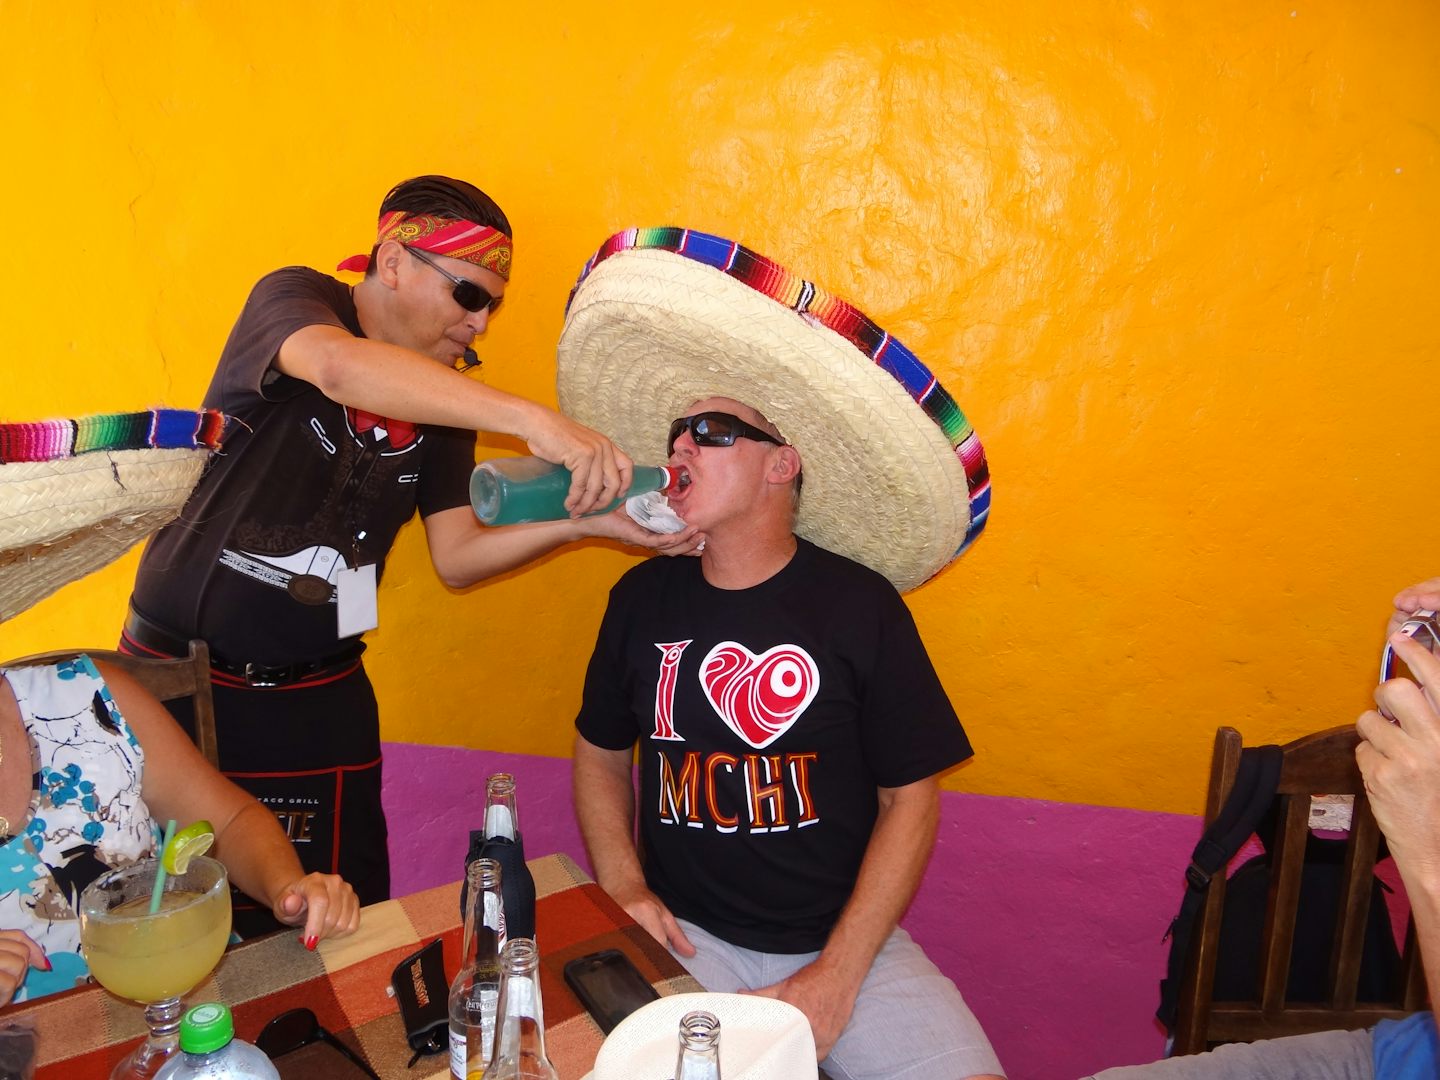 Patch getting a tequila shot in Mexico